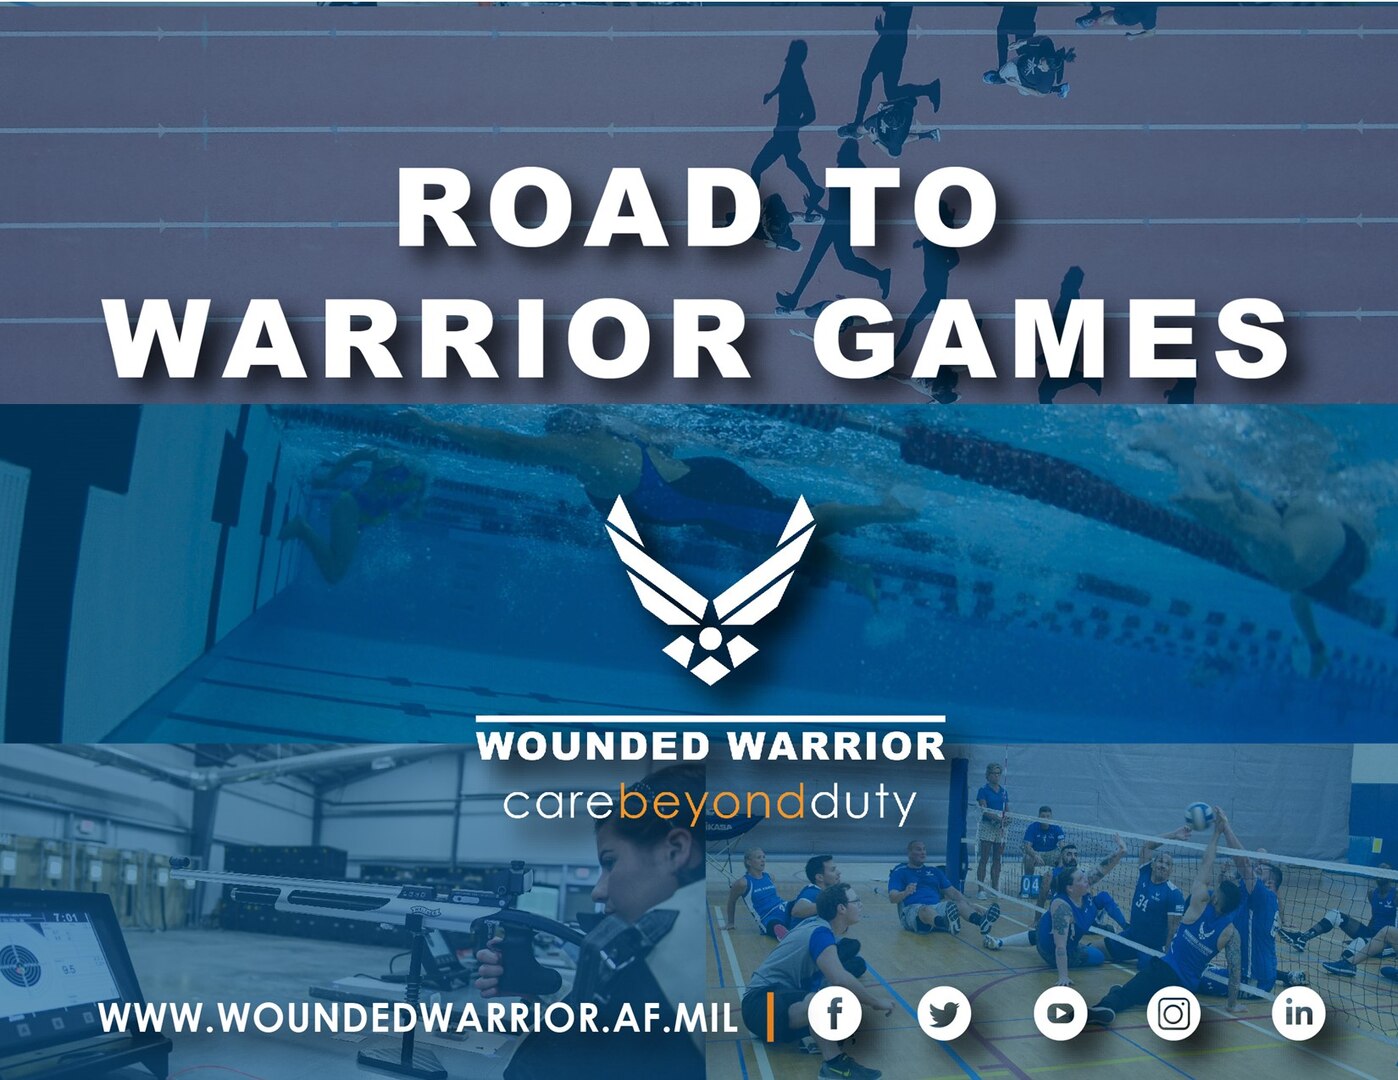 The 2021 Department of Defense Warrior Games Team Air Force is at Joint Base San Antonio-Randolph, Texas for a week of intense training in preparation for the games in September. (U.S. Air Force Graphic by Melissa Espinales)